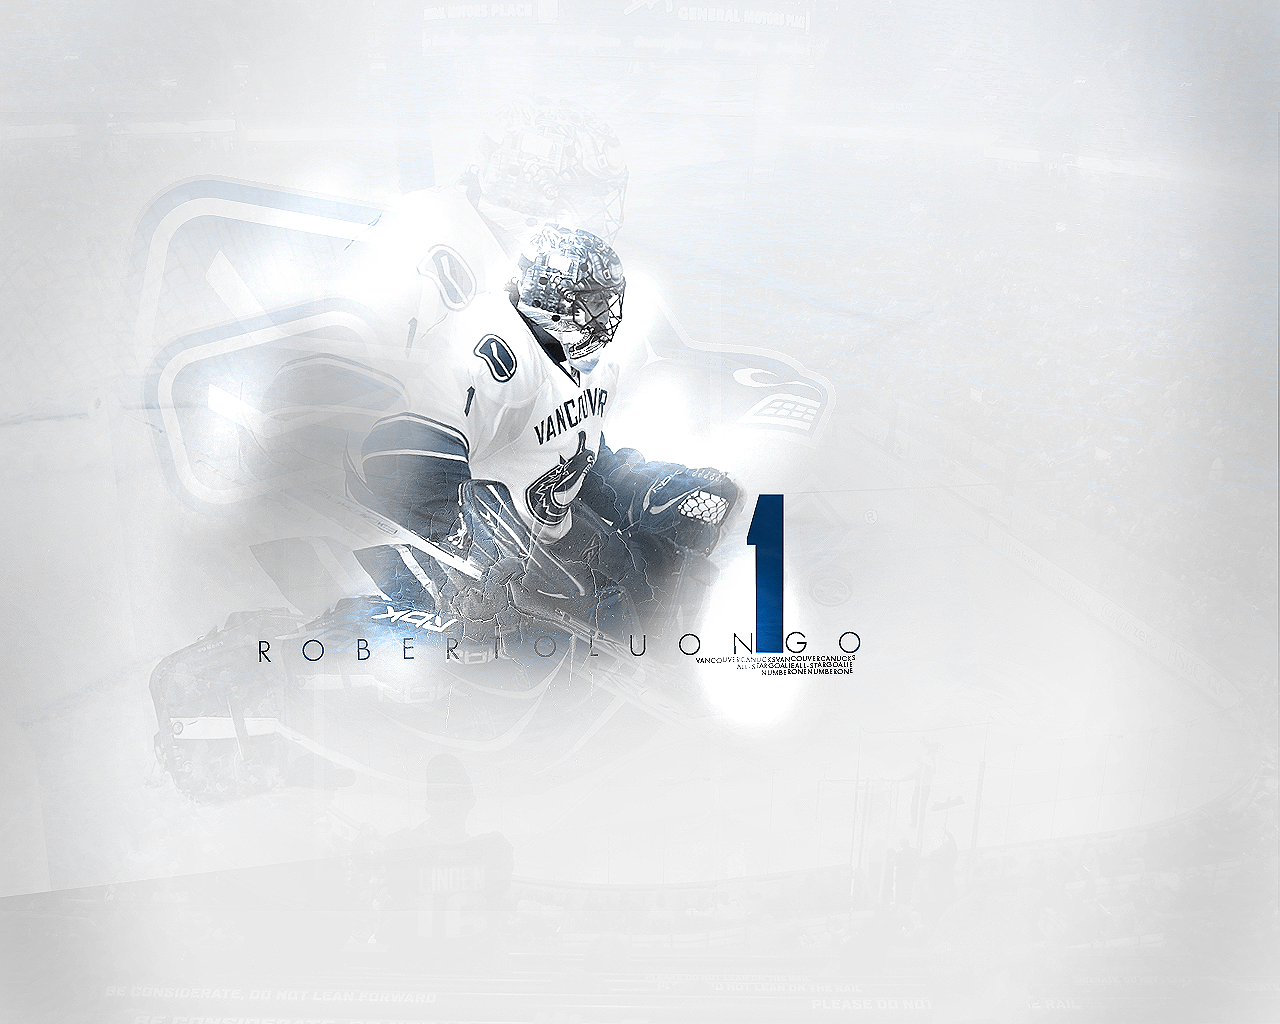 http://fc06.deviantart.net/fs34/f/2008/240/a/7/Roberto_Luongo_Wallpaper_II_5_by_nux_forever_1.png